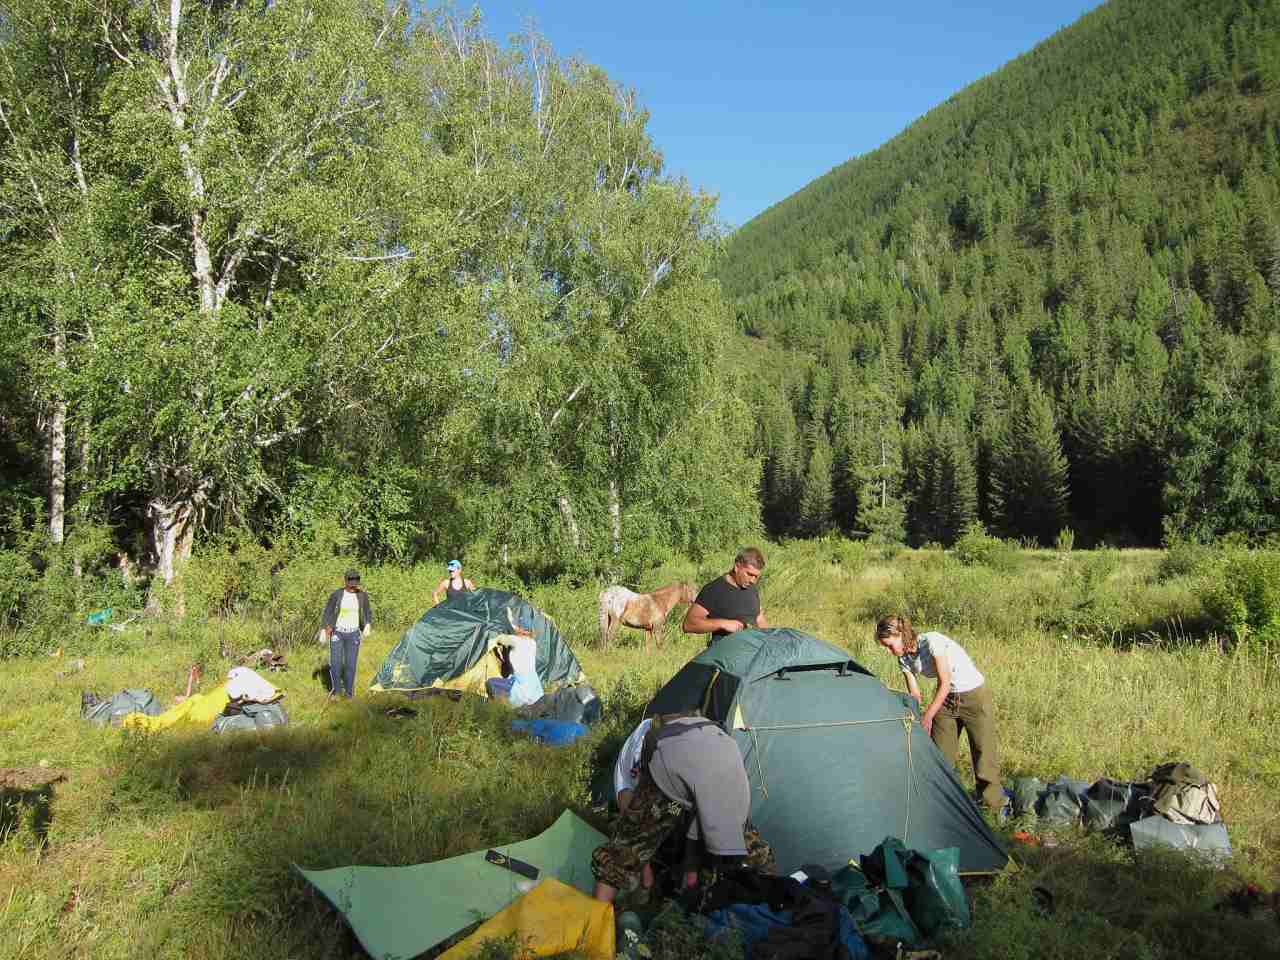 Camping & Making Fire, Altai Mountains, Russia